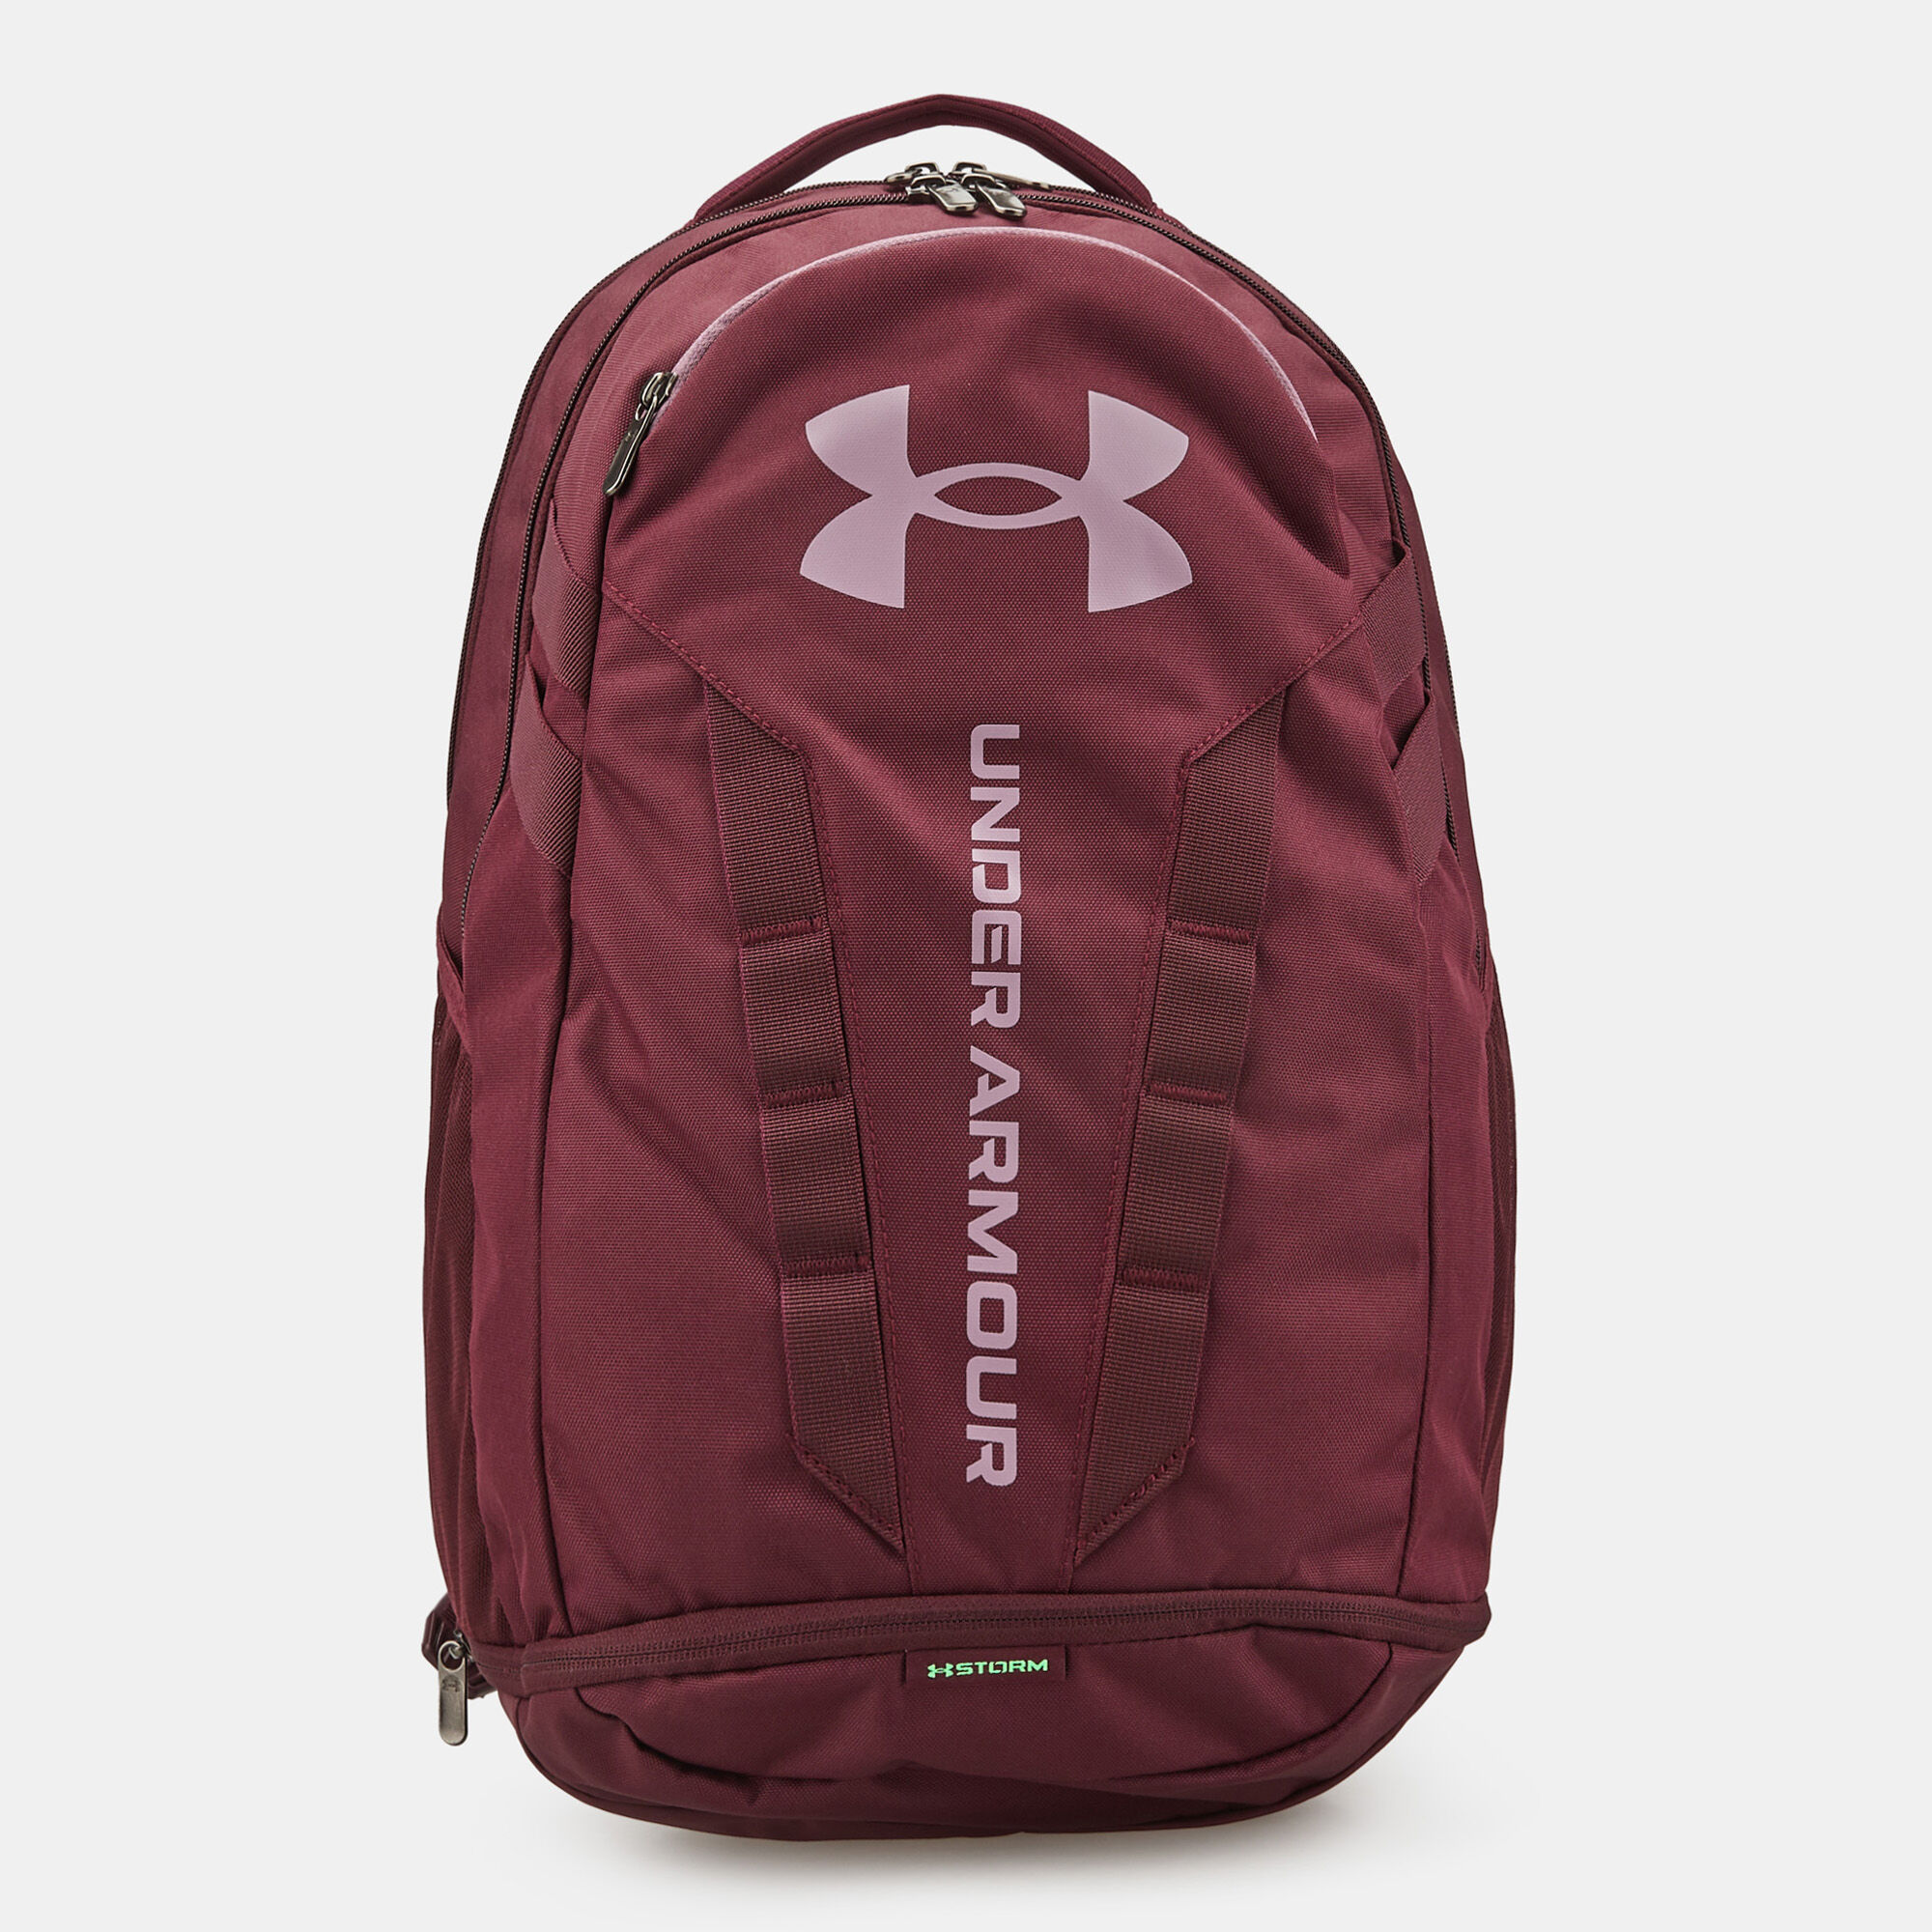 Under Armour Undeniable 5.0 Duffel Bag | Big 5 Sporting Goods